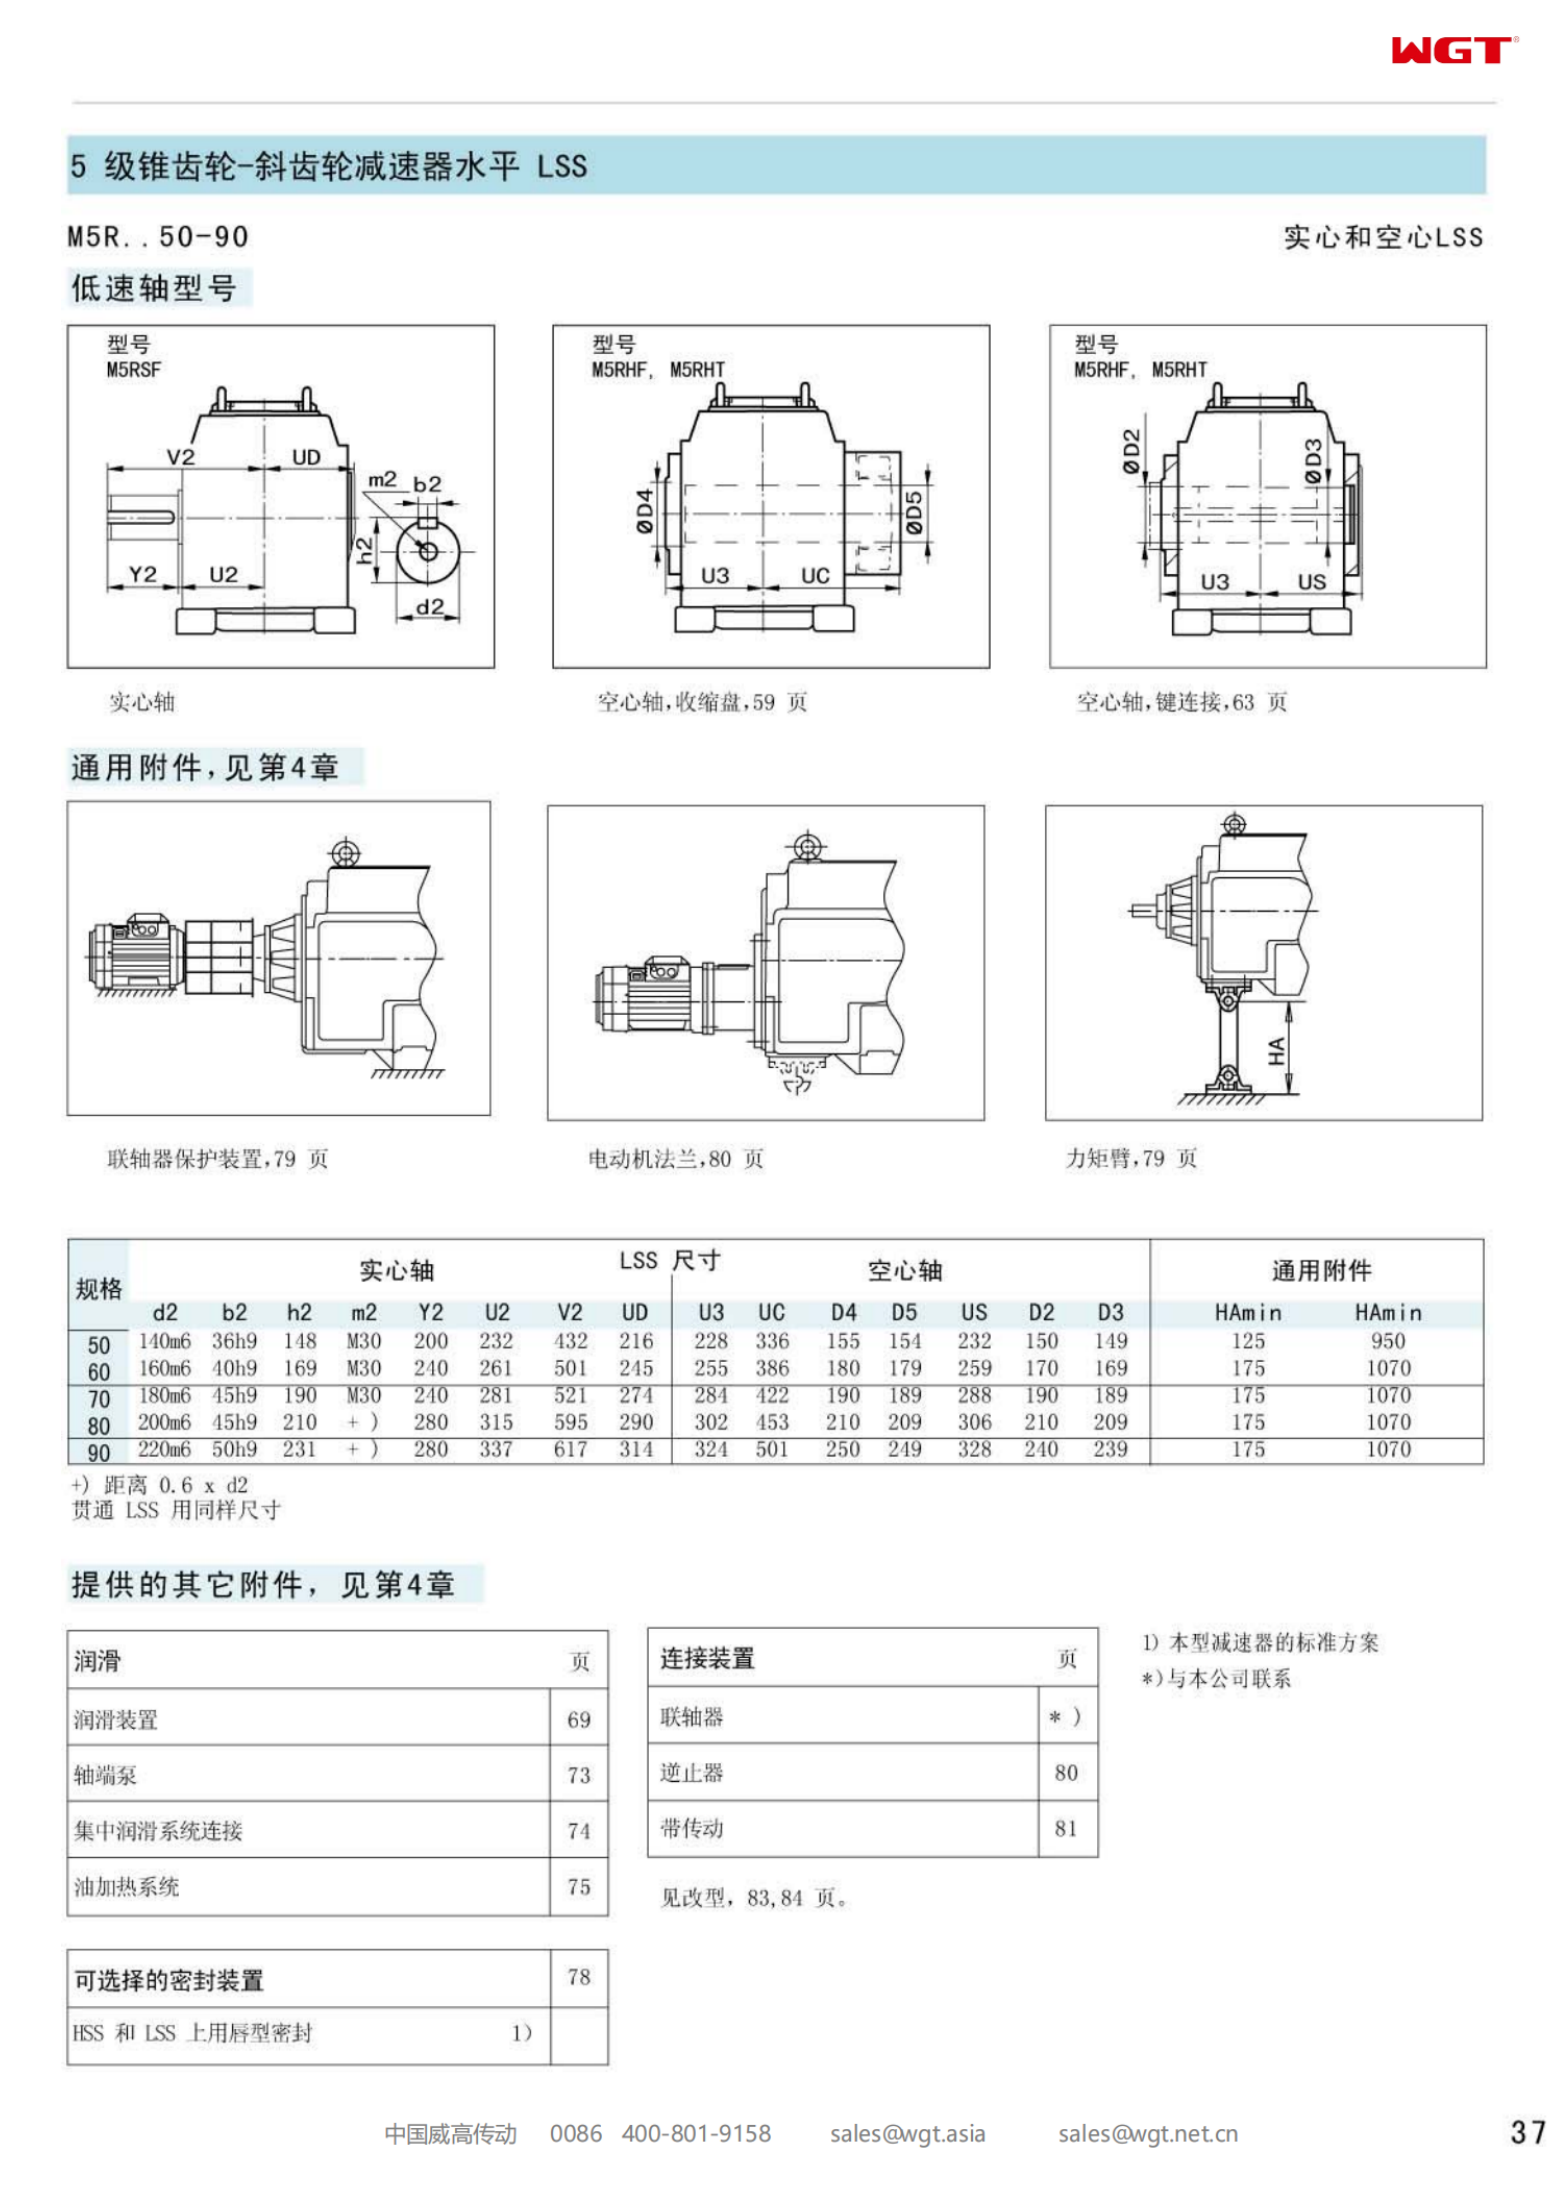 M5RSF50 Replace_SEW_M_Series Gearbox